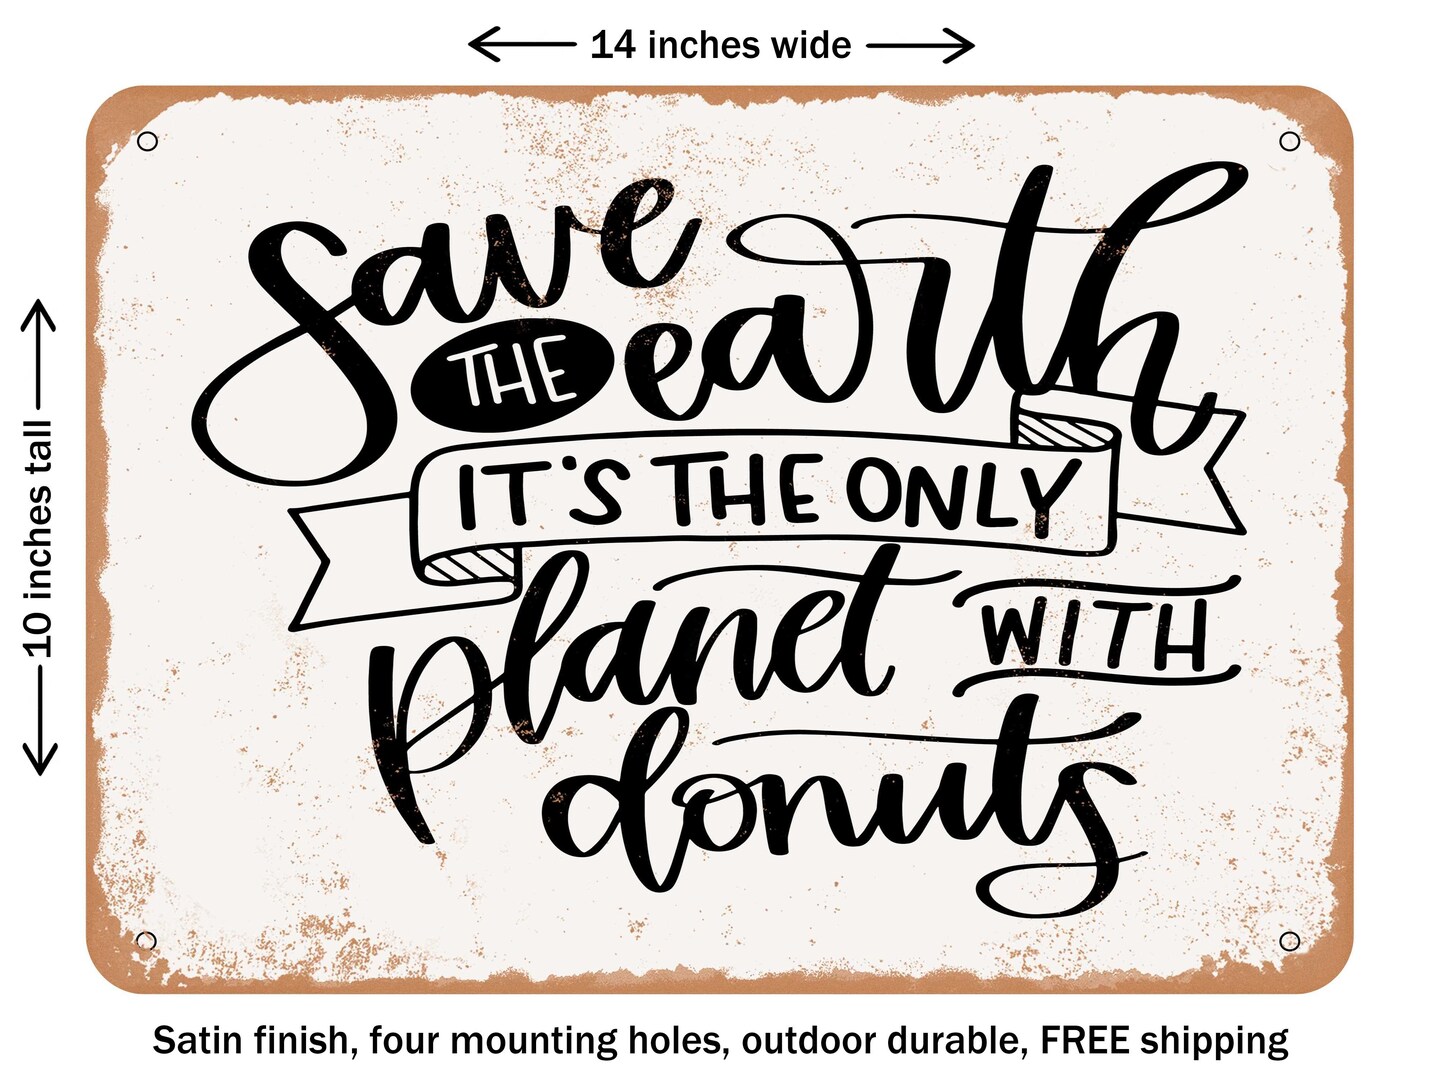 DECORATIVE METAL SIGN - Save the Earth Donuts - Vintage Rusty Look